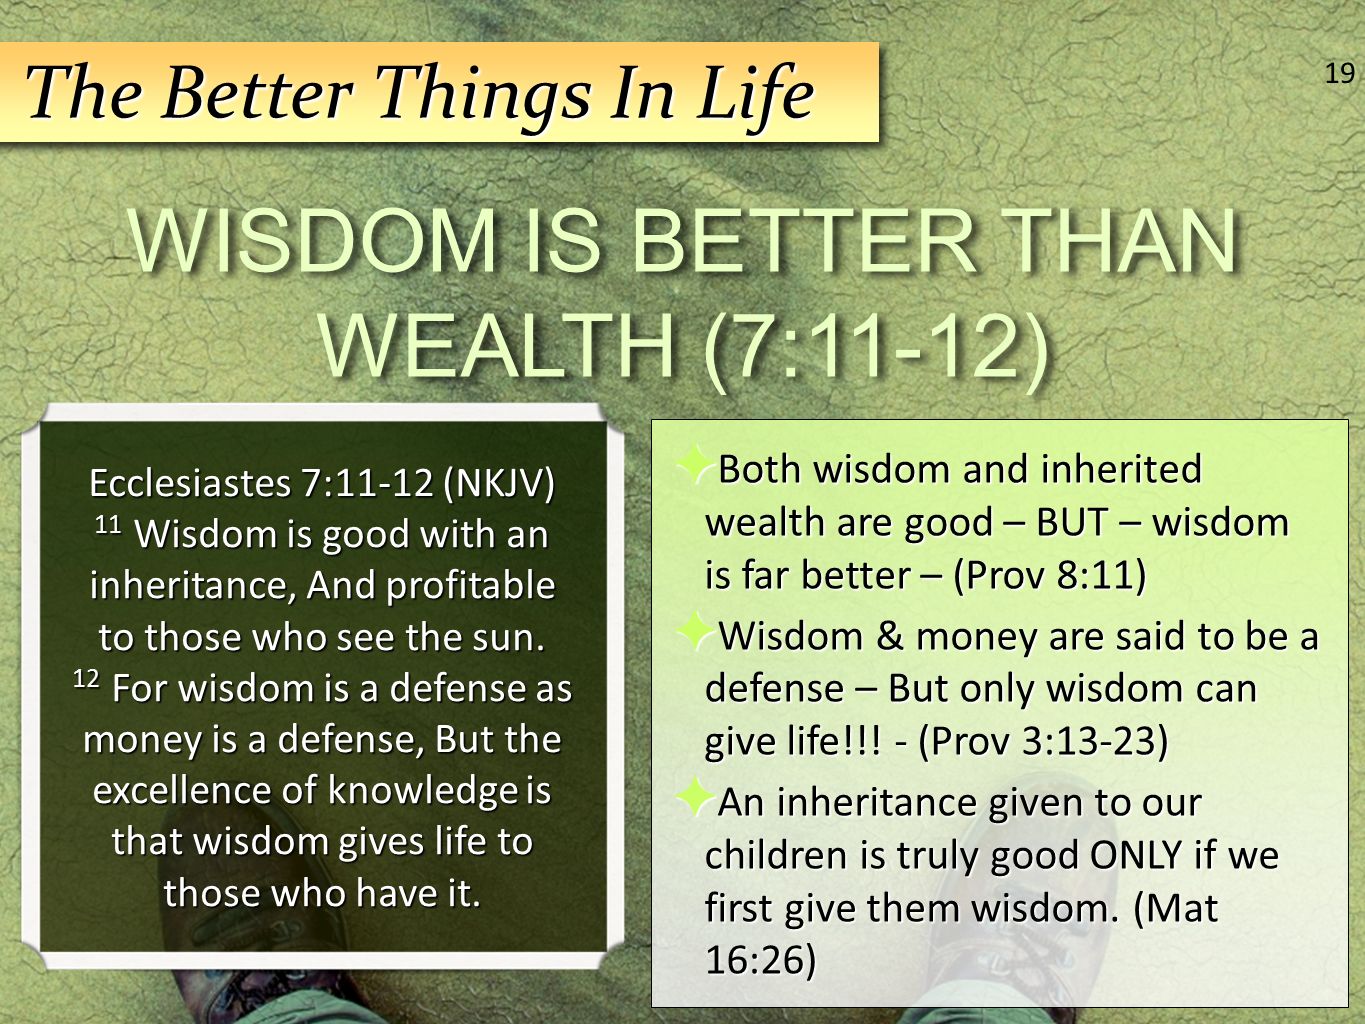 wisdom is more valuable than wealth